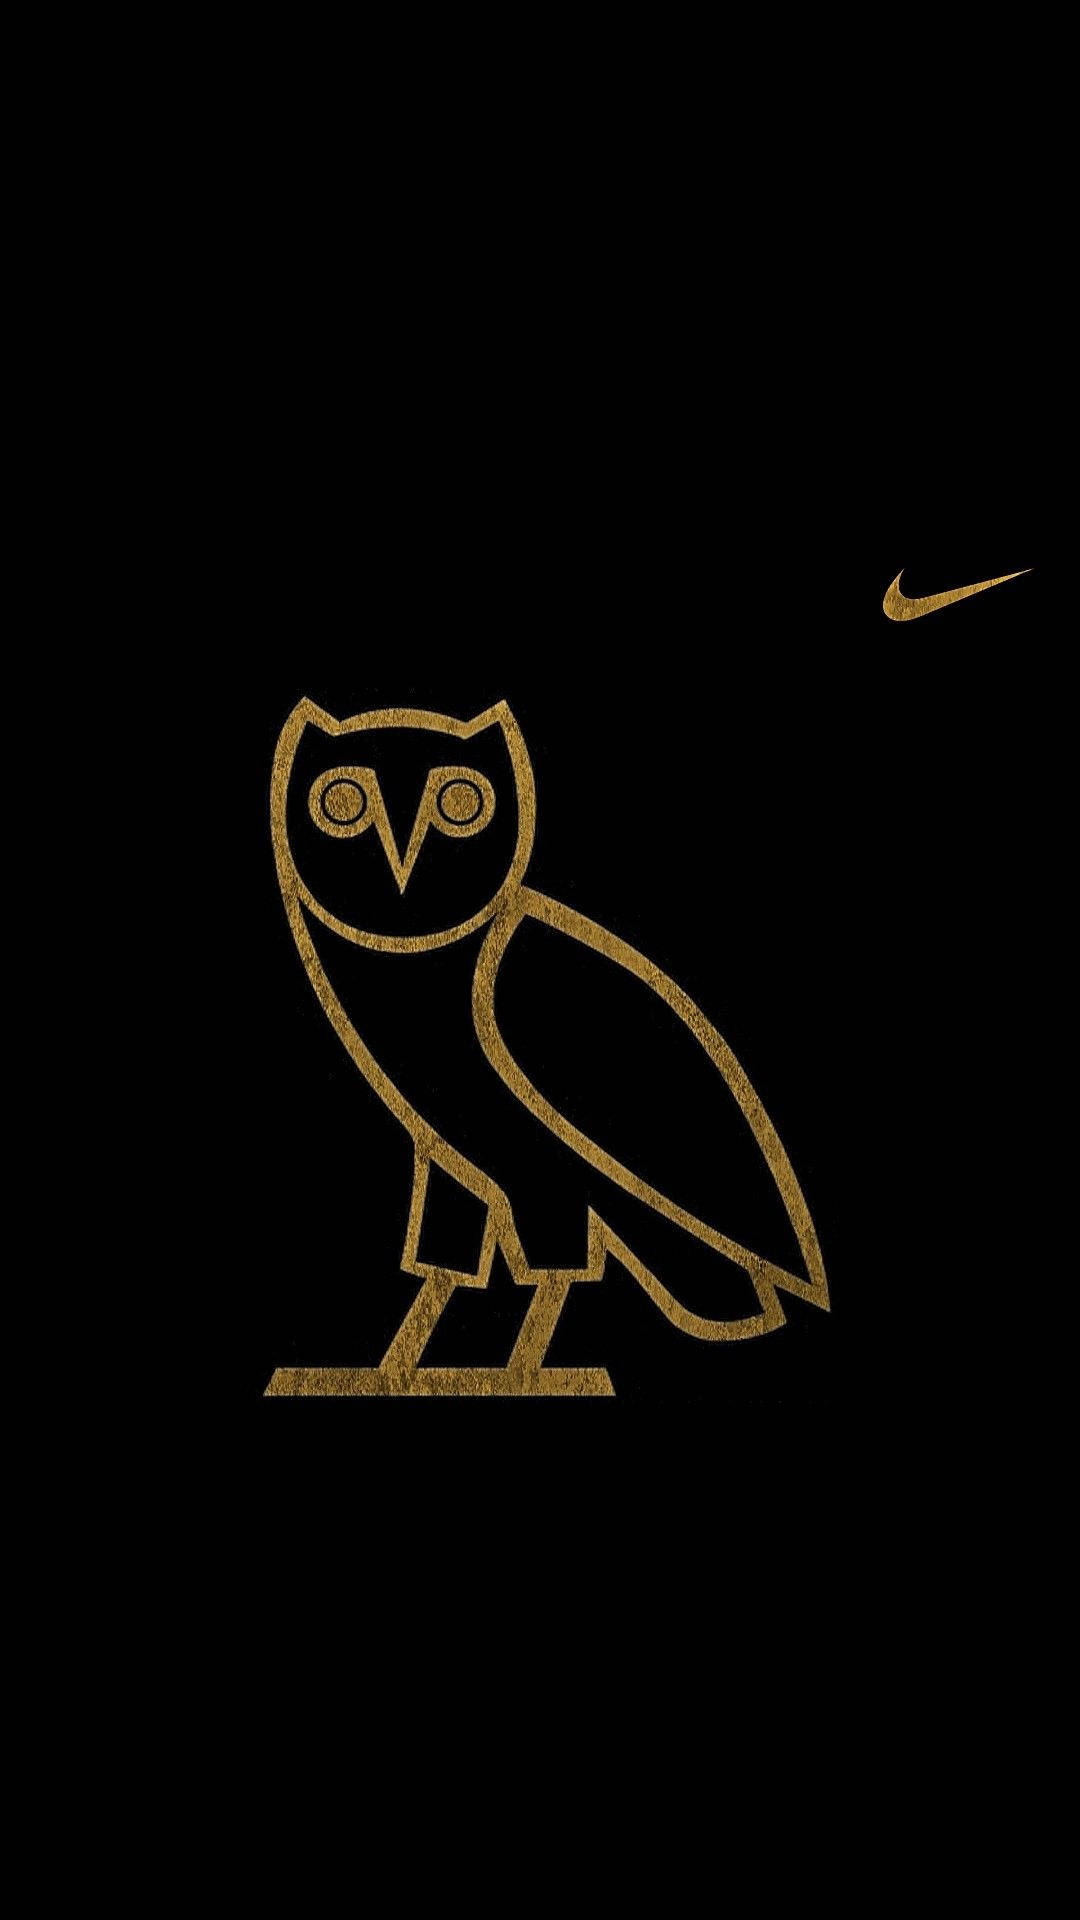 Nike Emblem With Cool Owl Background